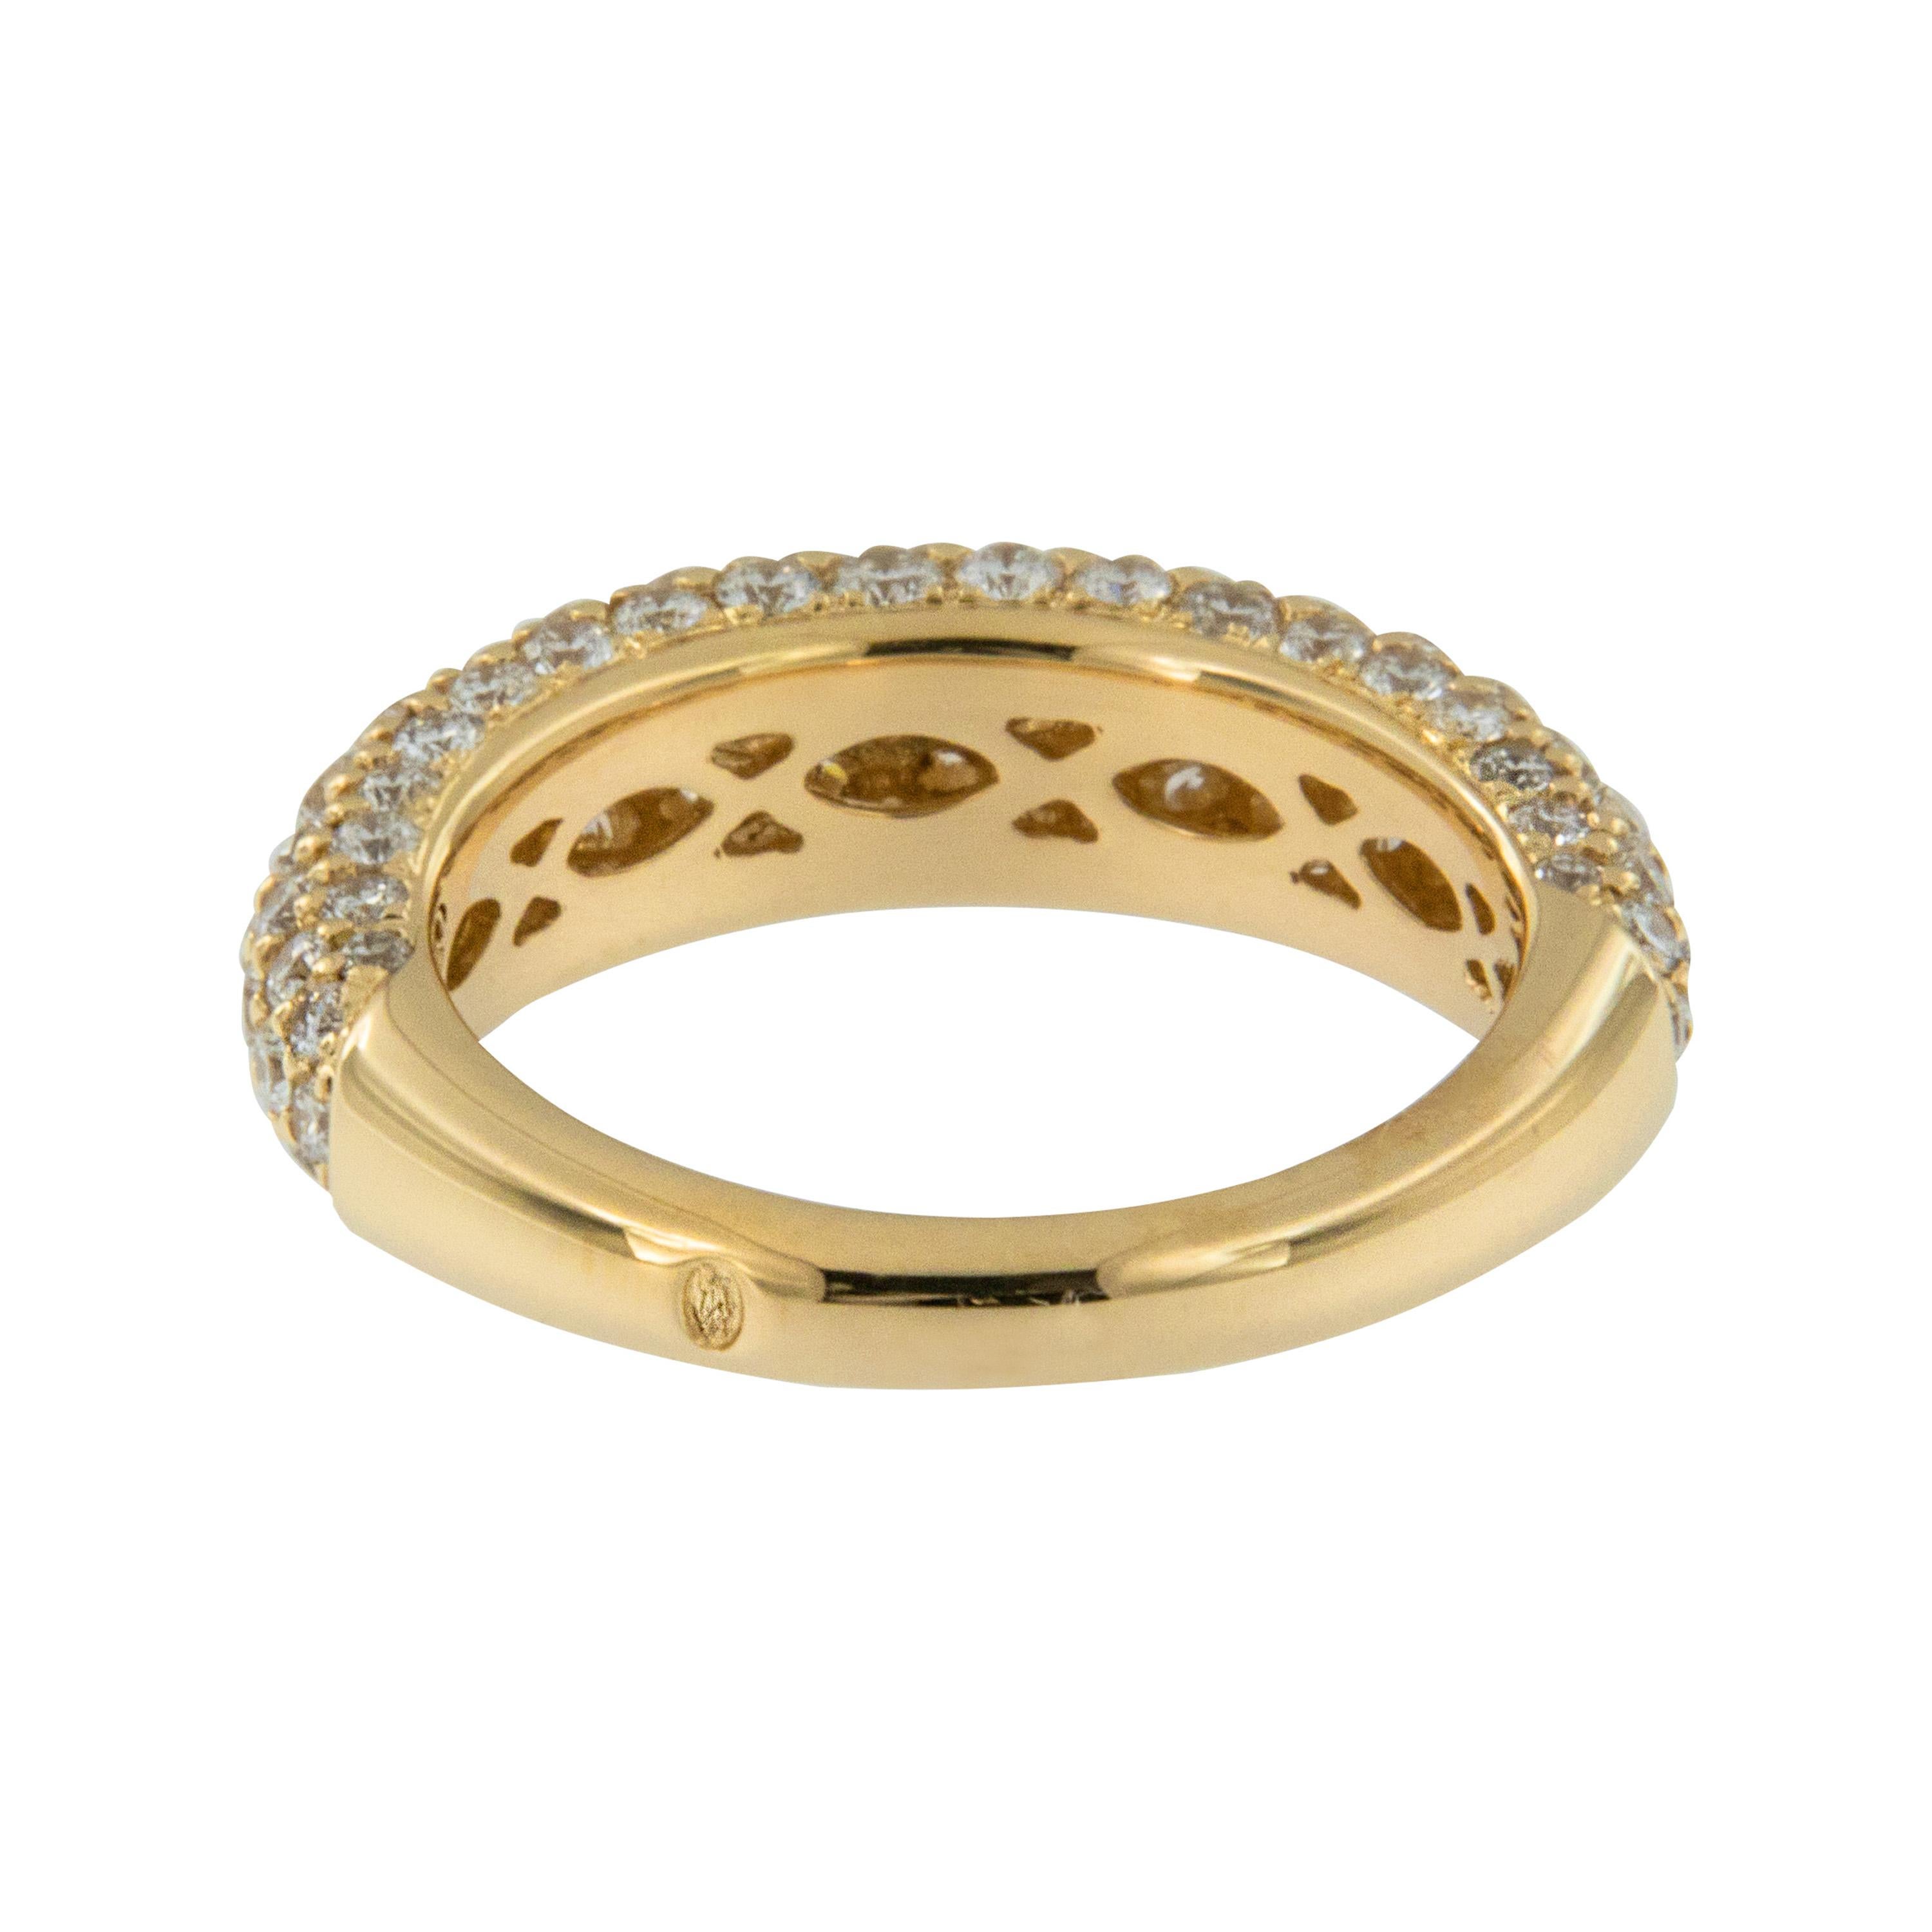 Made in Switzerland, this bombe' style band is exquisite from any angle! The French word bombe' translates to bomb in English for it's appealing rounded shape and this style made it's debut during the Edwardian period.  18 karat yellow gold with 99